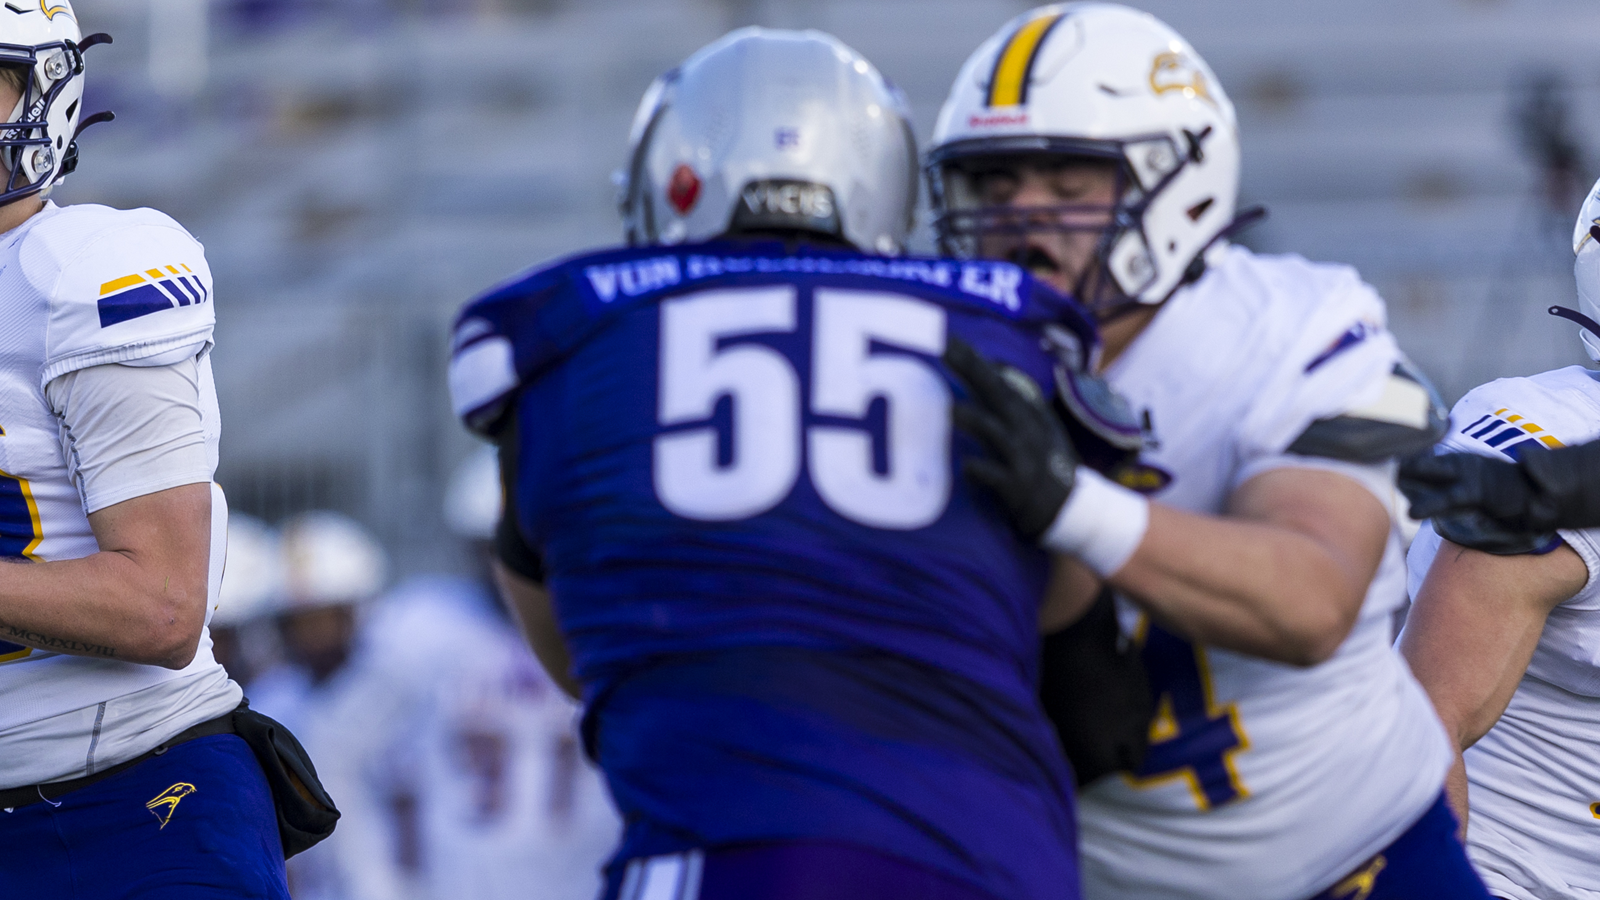 Western football player Max Von Muehldorfer trying to get to the quarterback while being blocked by an opposing player